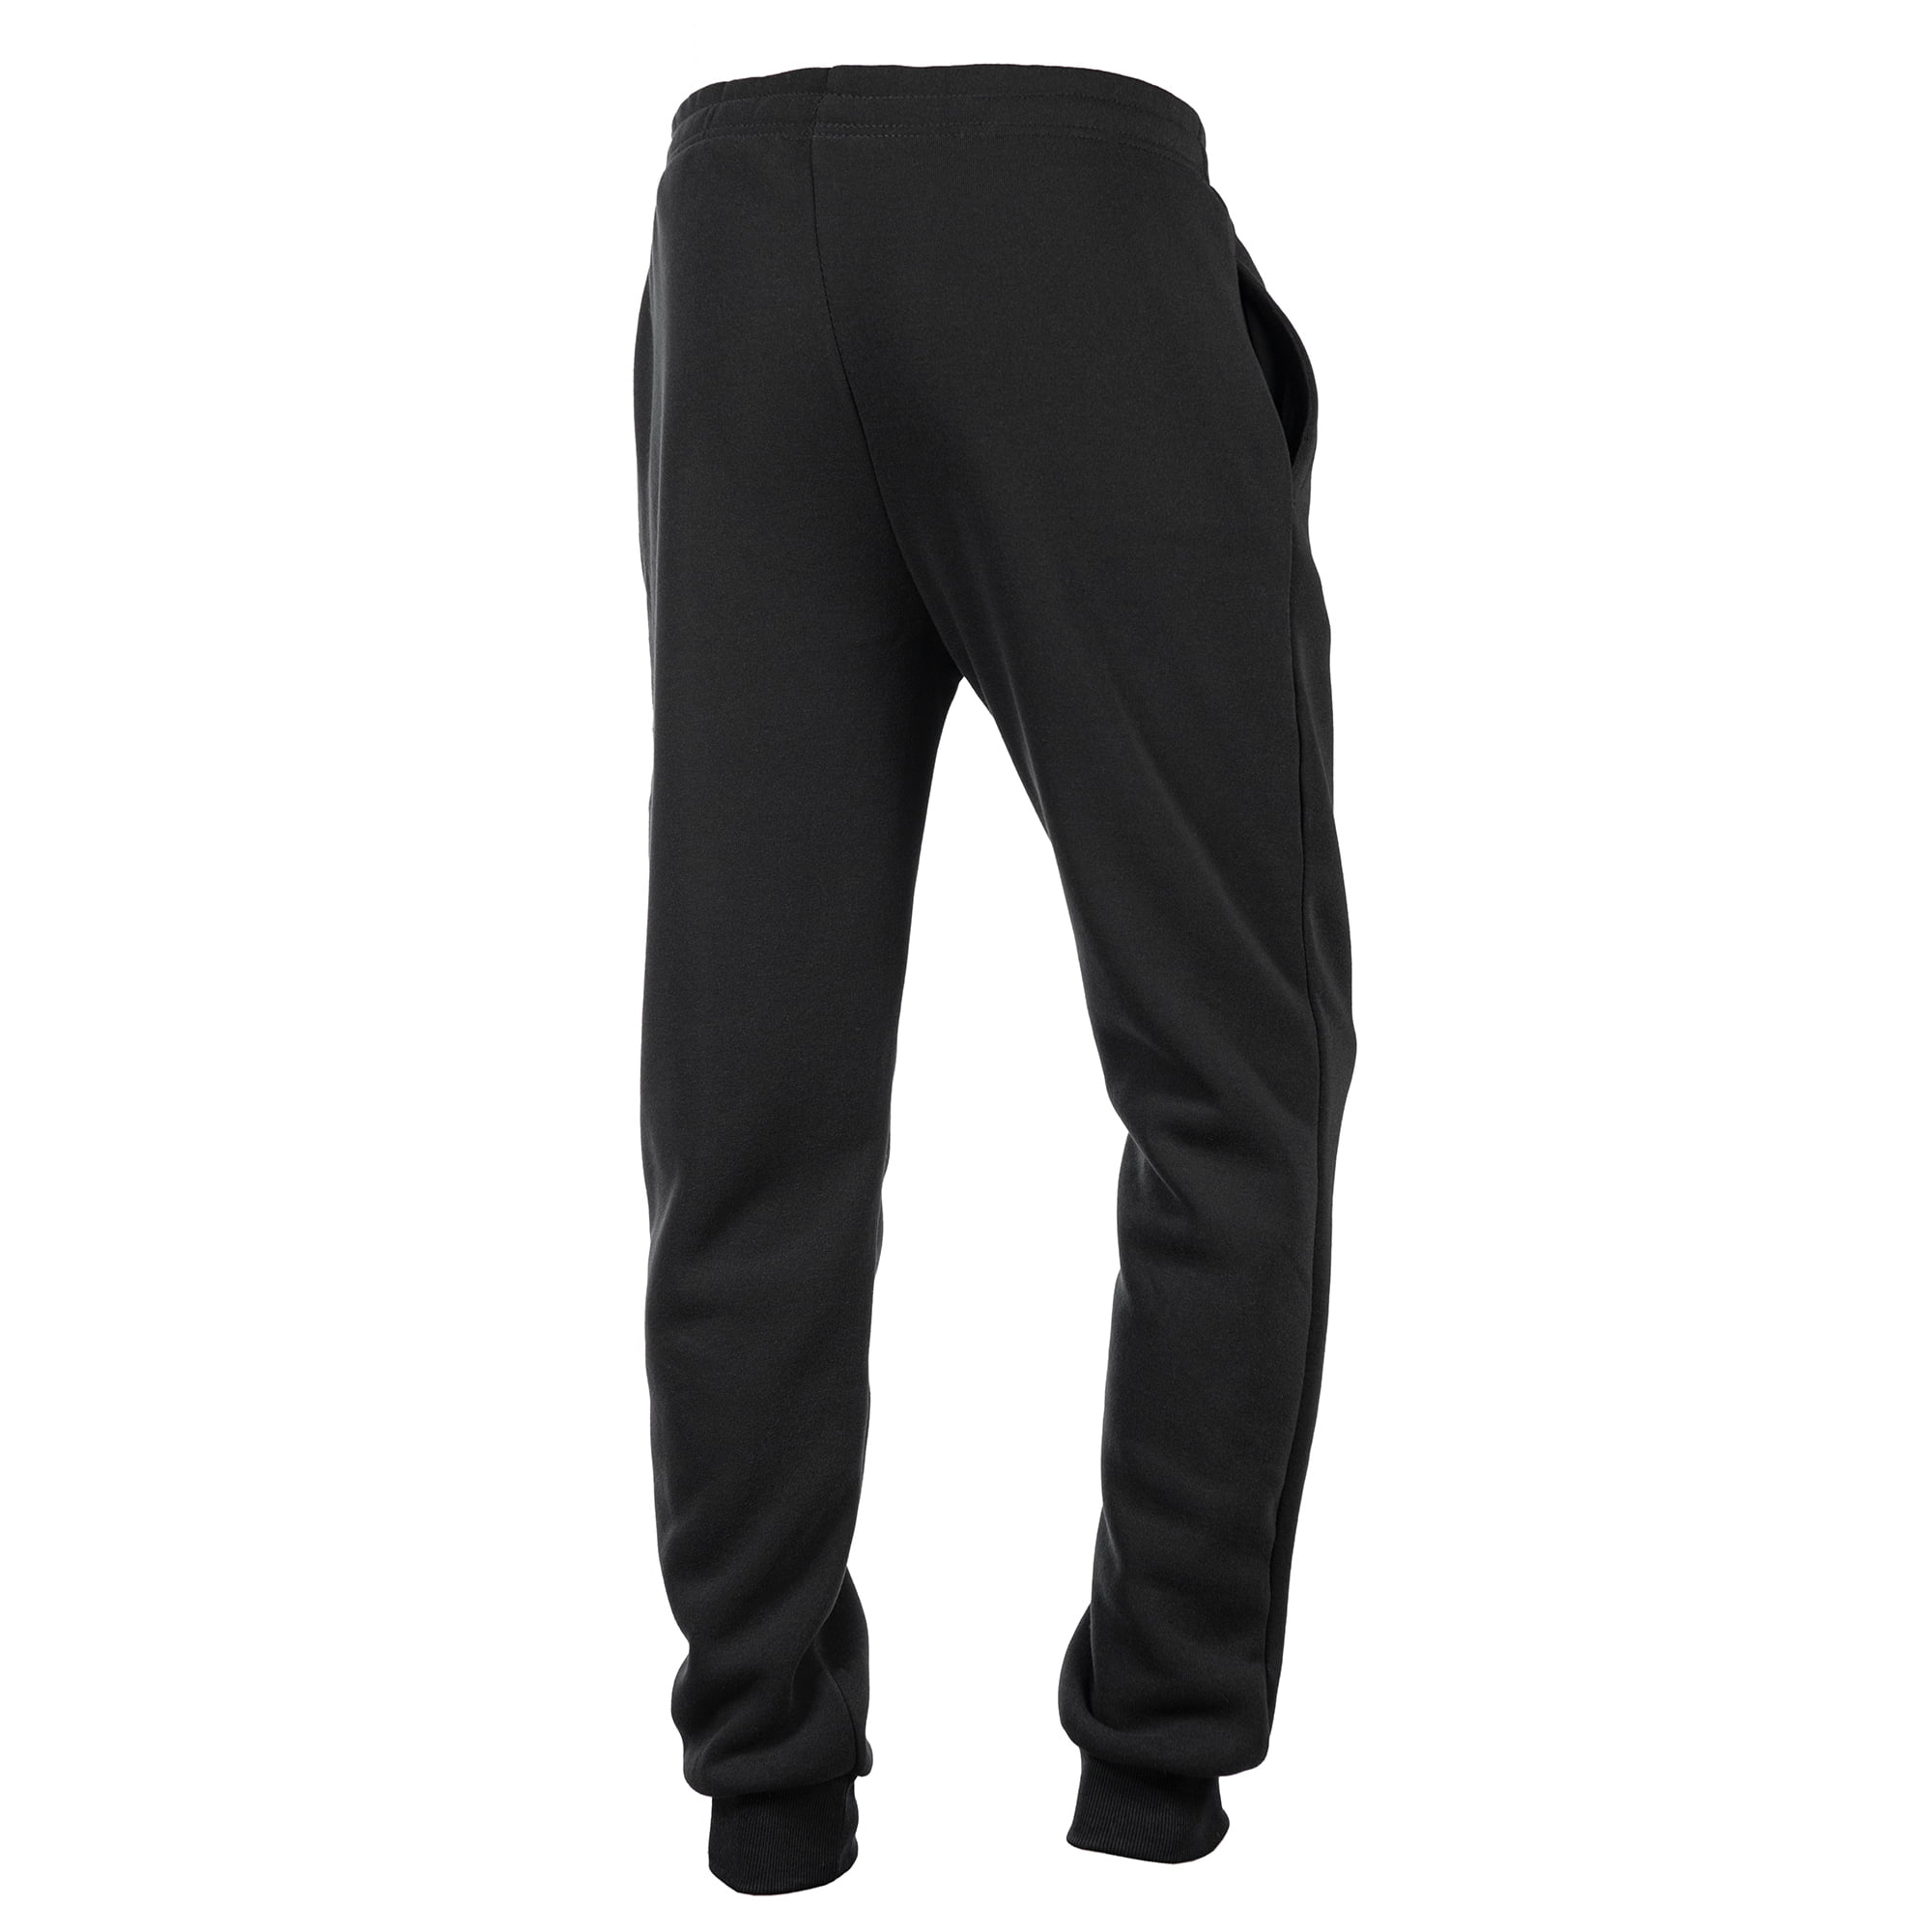 Women's Trackpants Fleece Lined For Gym Slim Fit 510- Grey